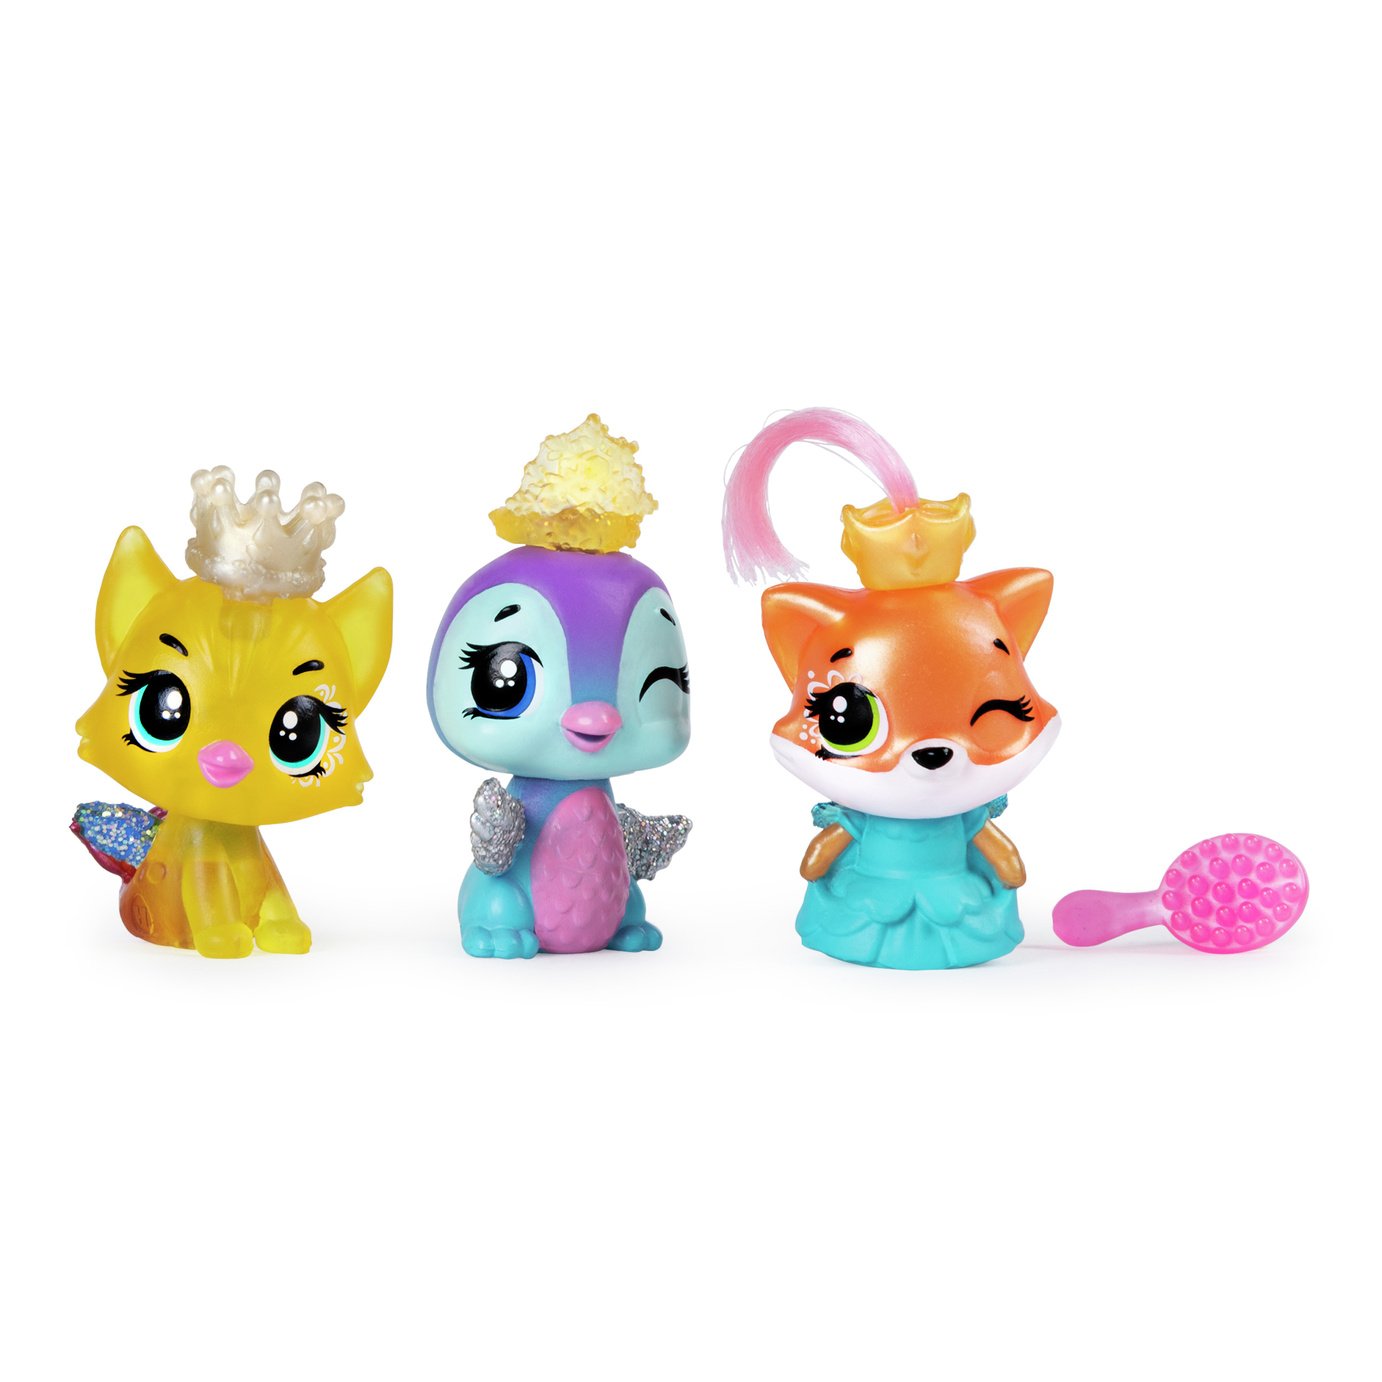 Hatchimals CollEGGtibles Royals Multipack Review